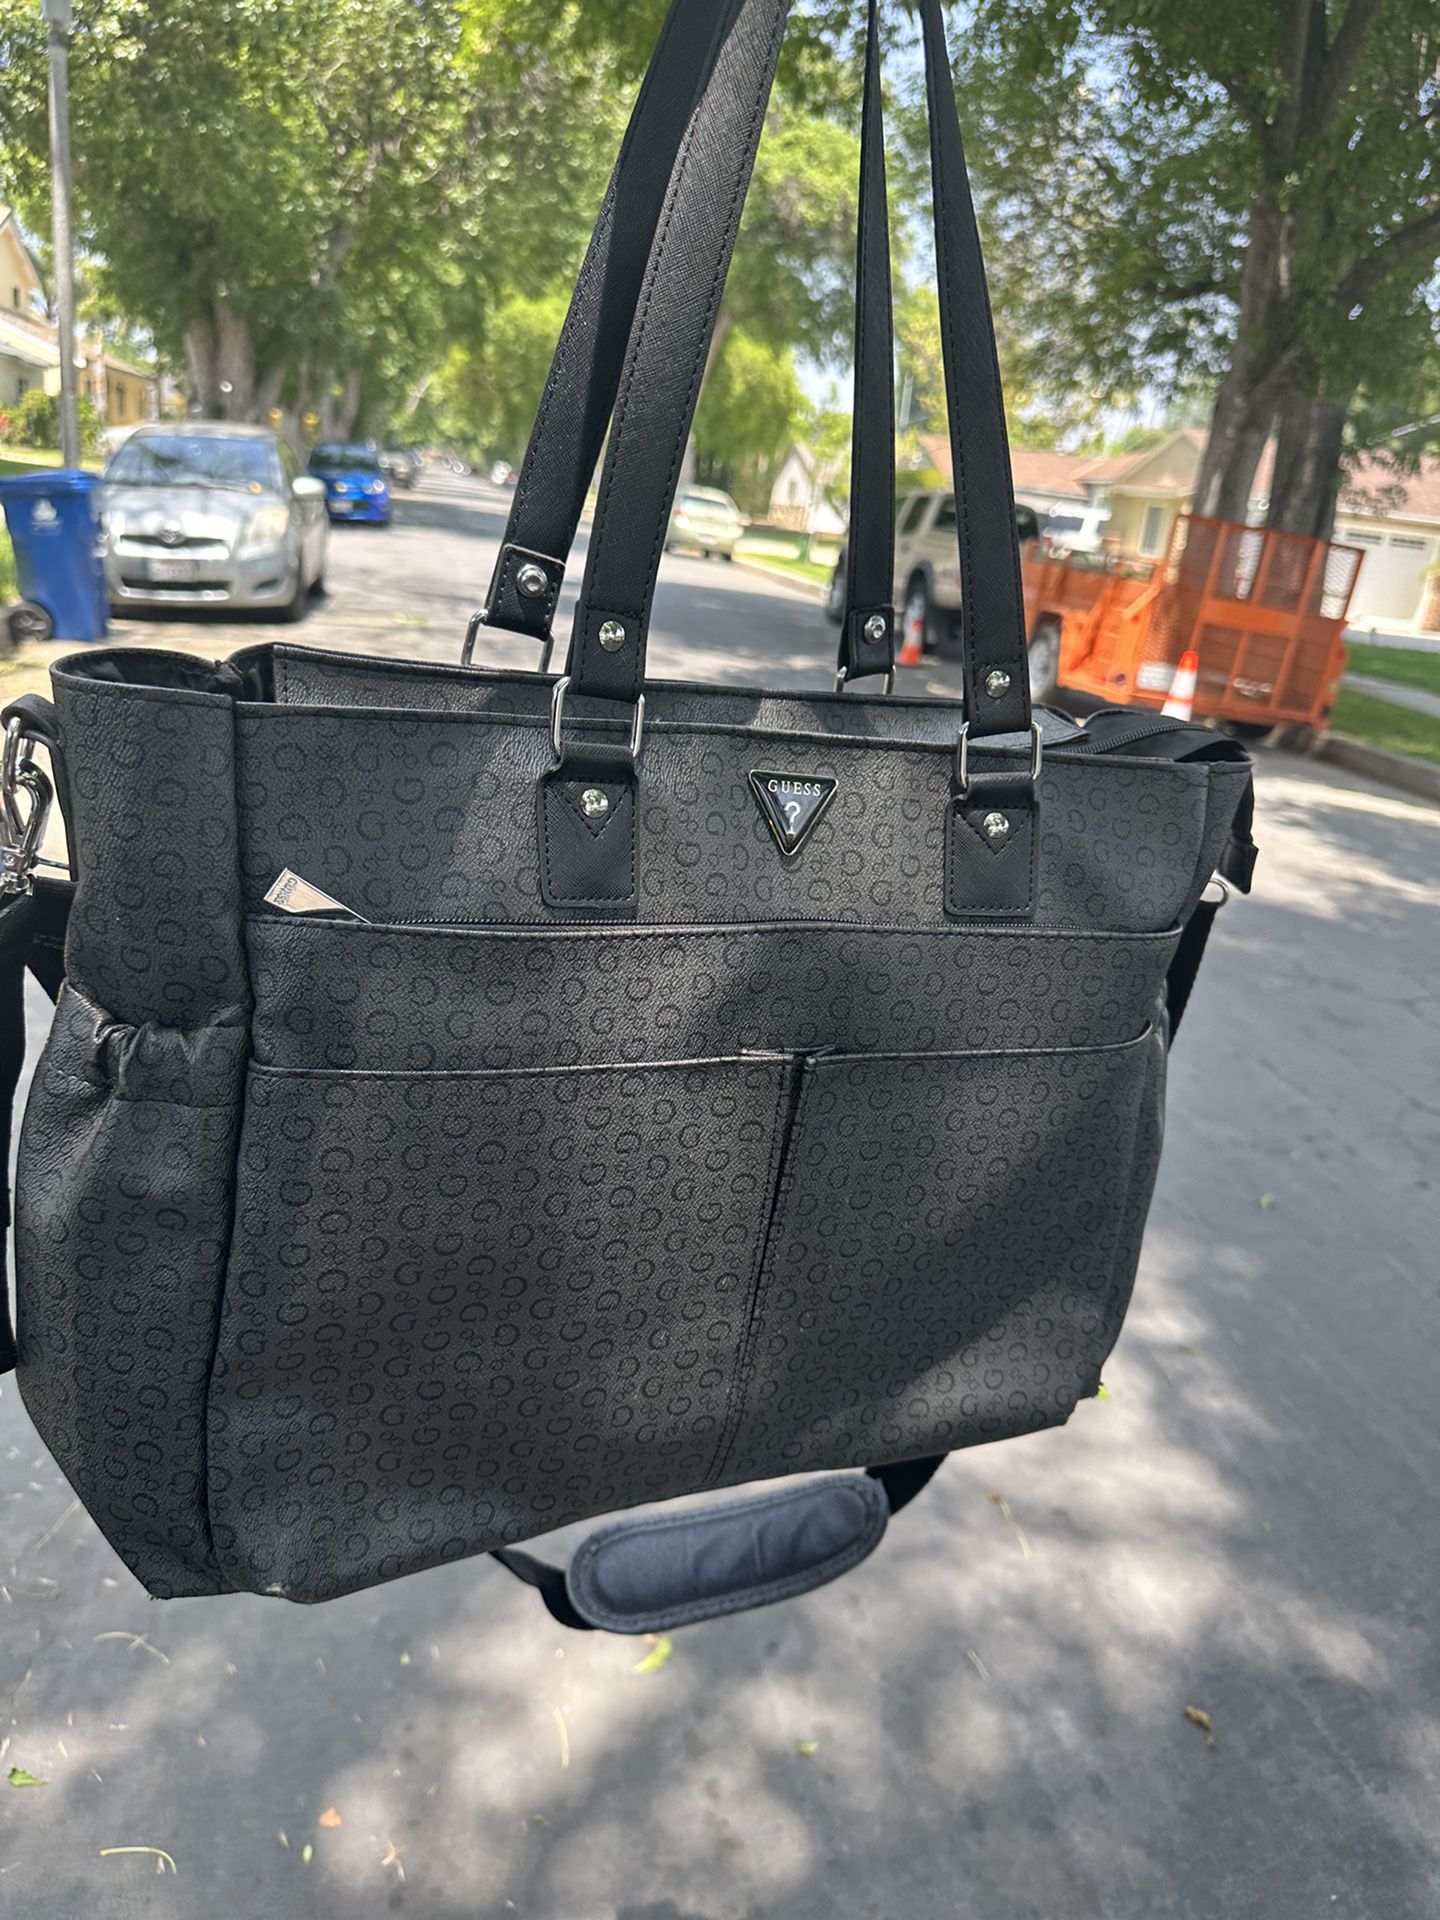 Guess Travel Bag for Sale in Los Angeles, CA - OfferUp